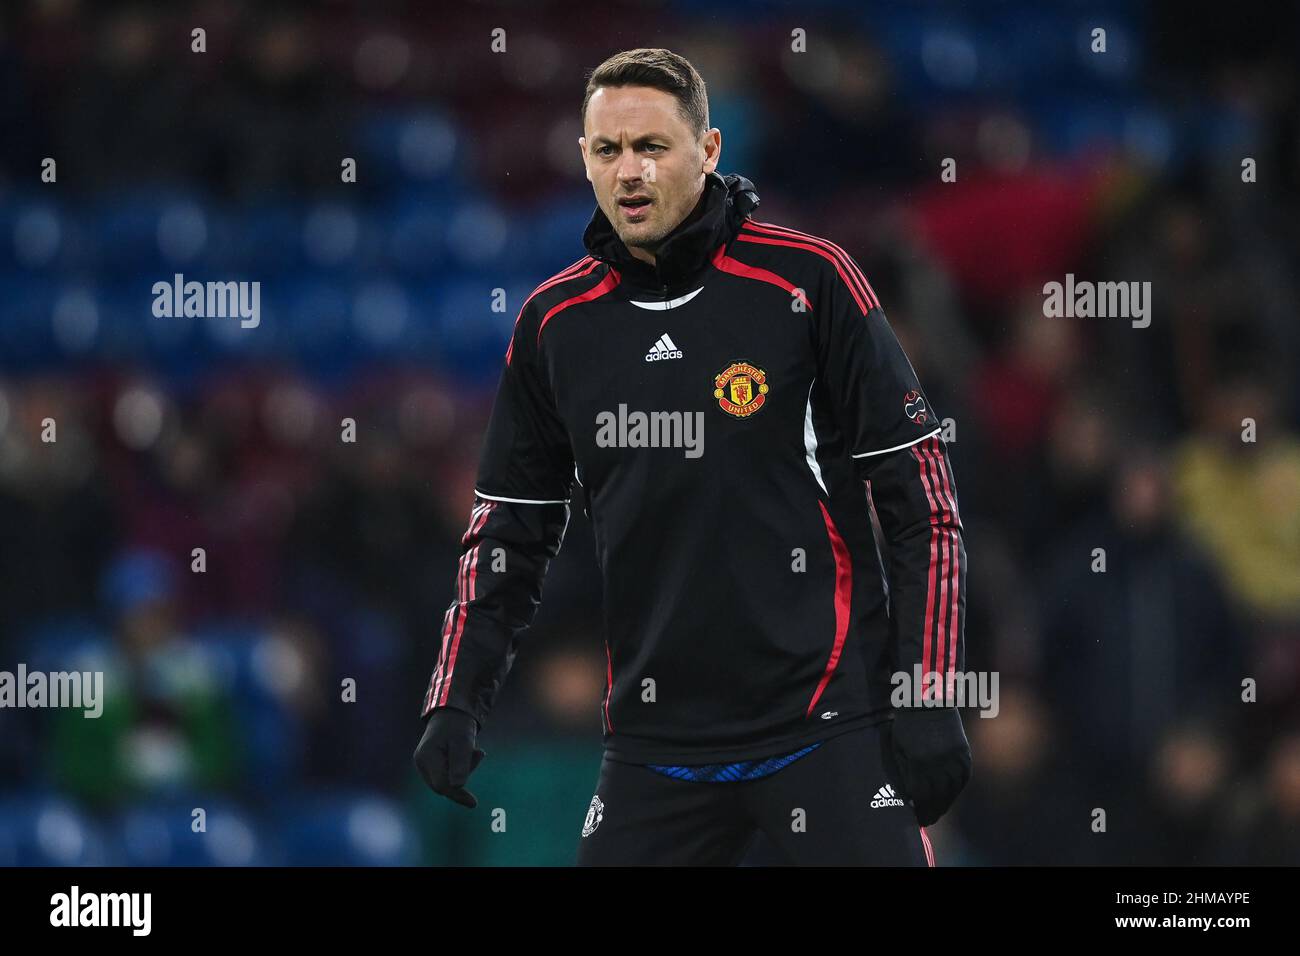 Nemanja Matic #31 of Manchester United during the pre-game warmup Stock Photo